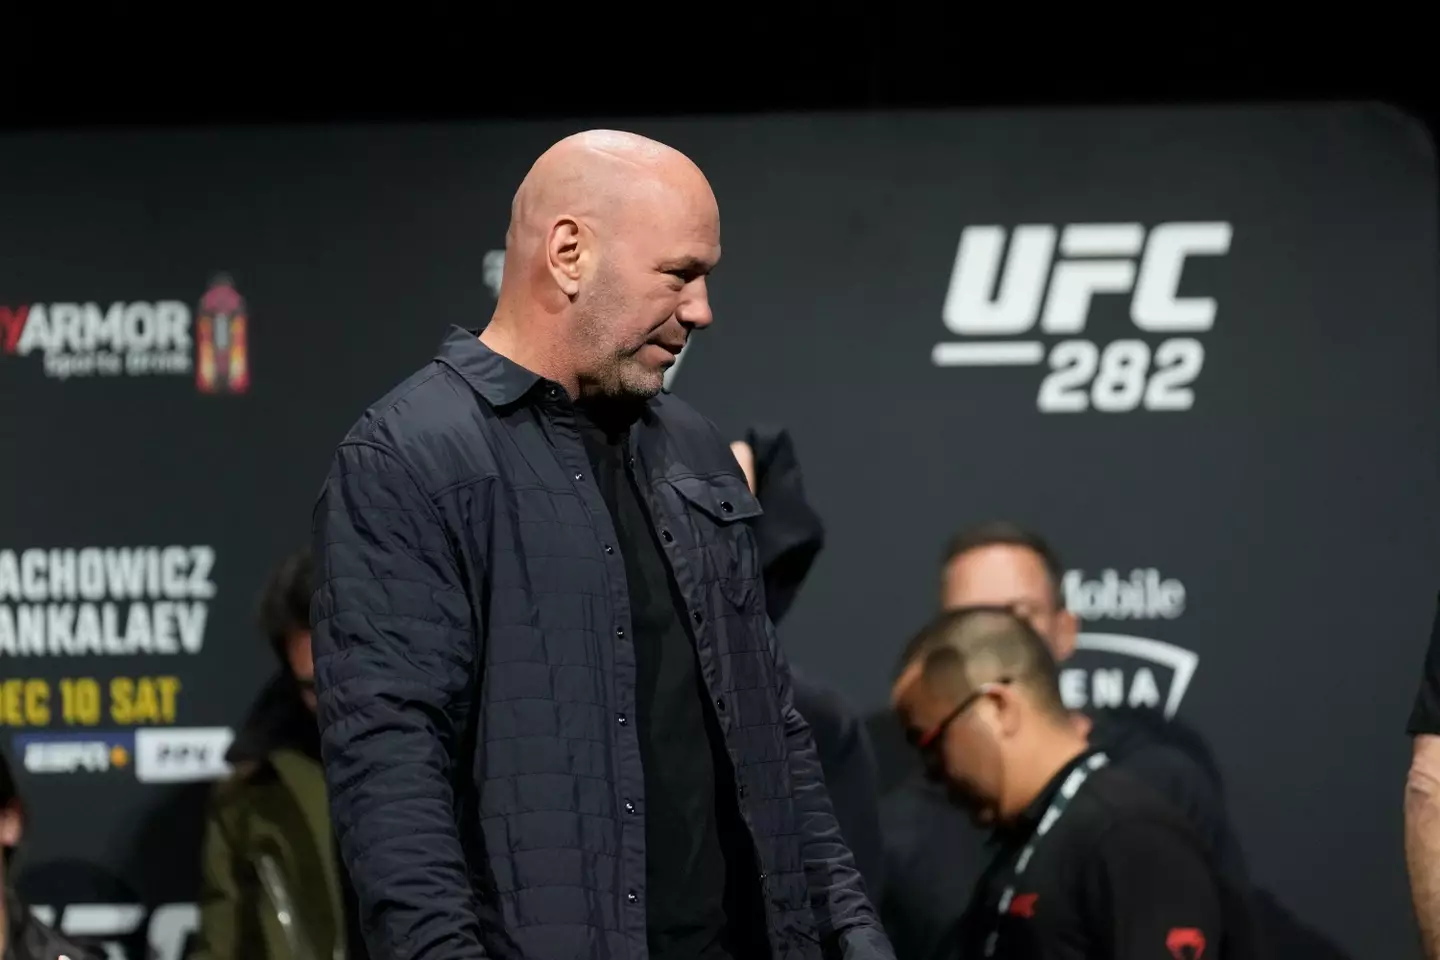 Dana White on stage for the UFC 282 pre-fight press conference. Image: Alamy 